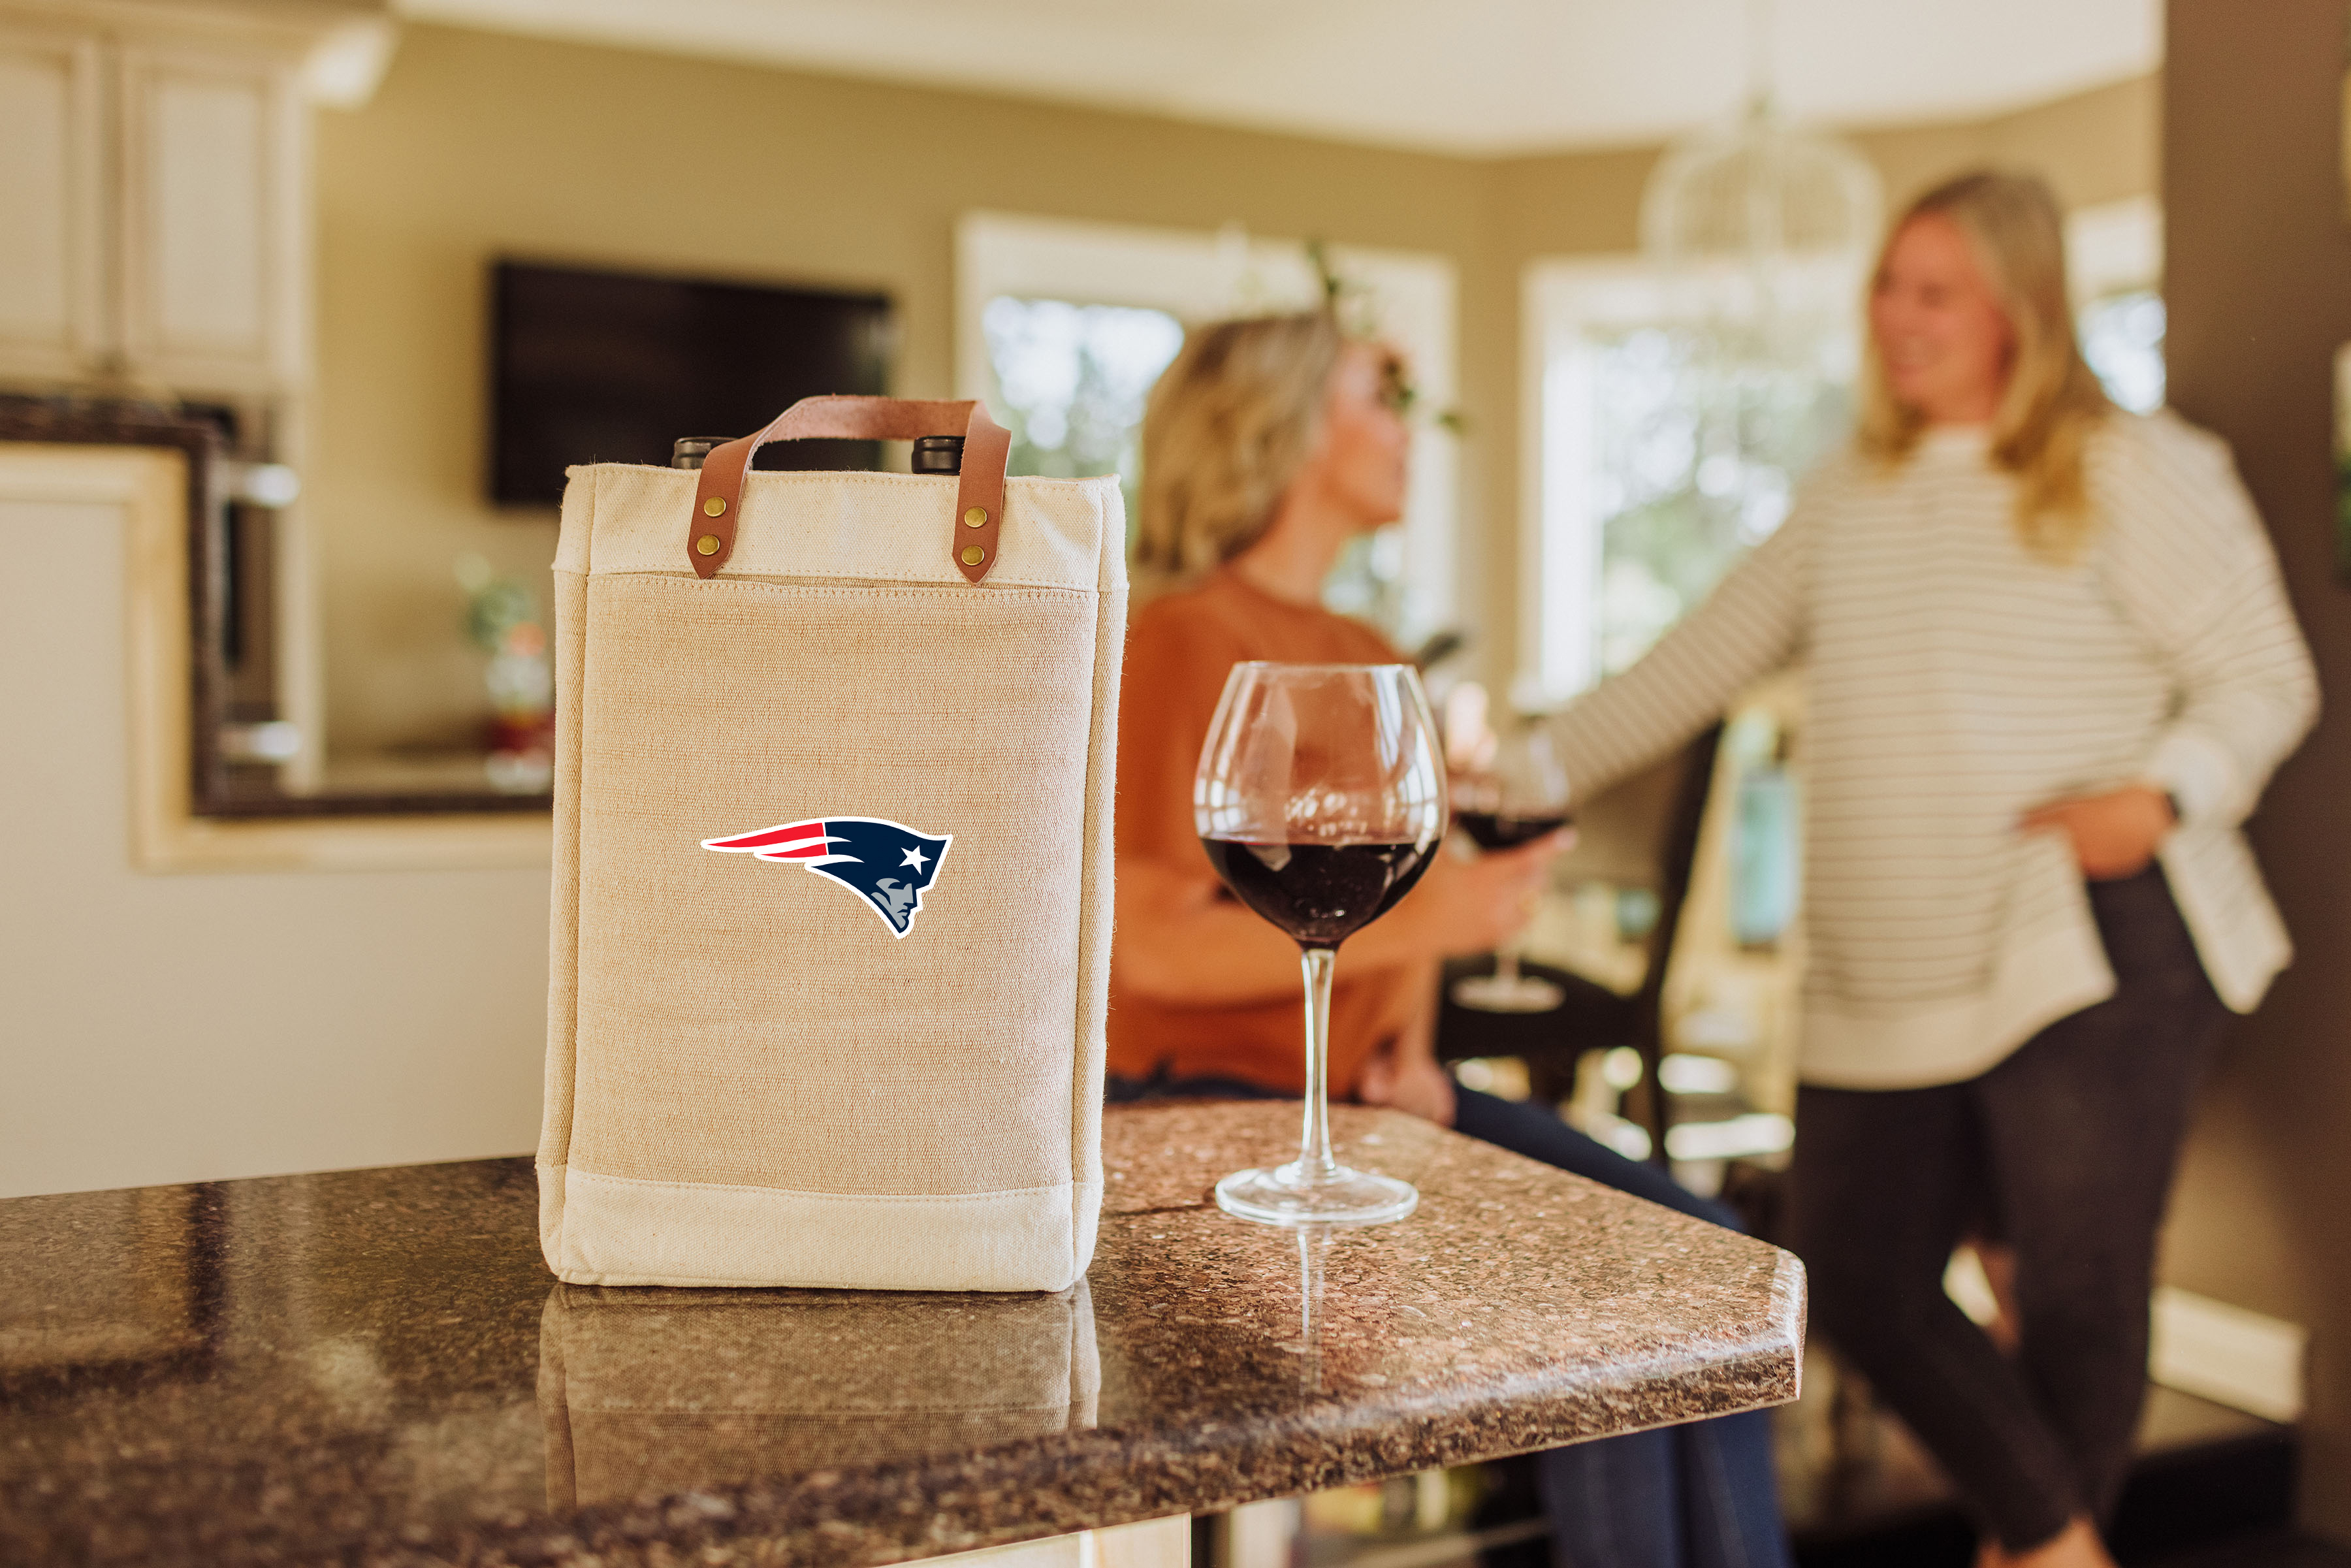 New England Patriots - Pinot Jute 2 Bottle Insulated Wine Bag